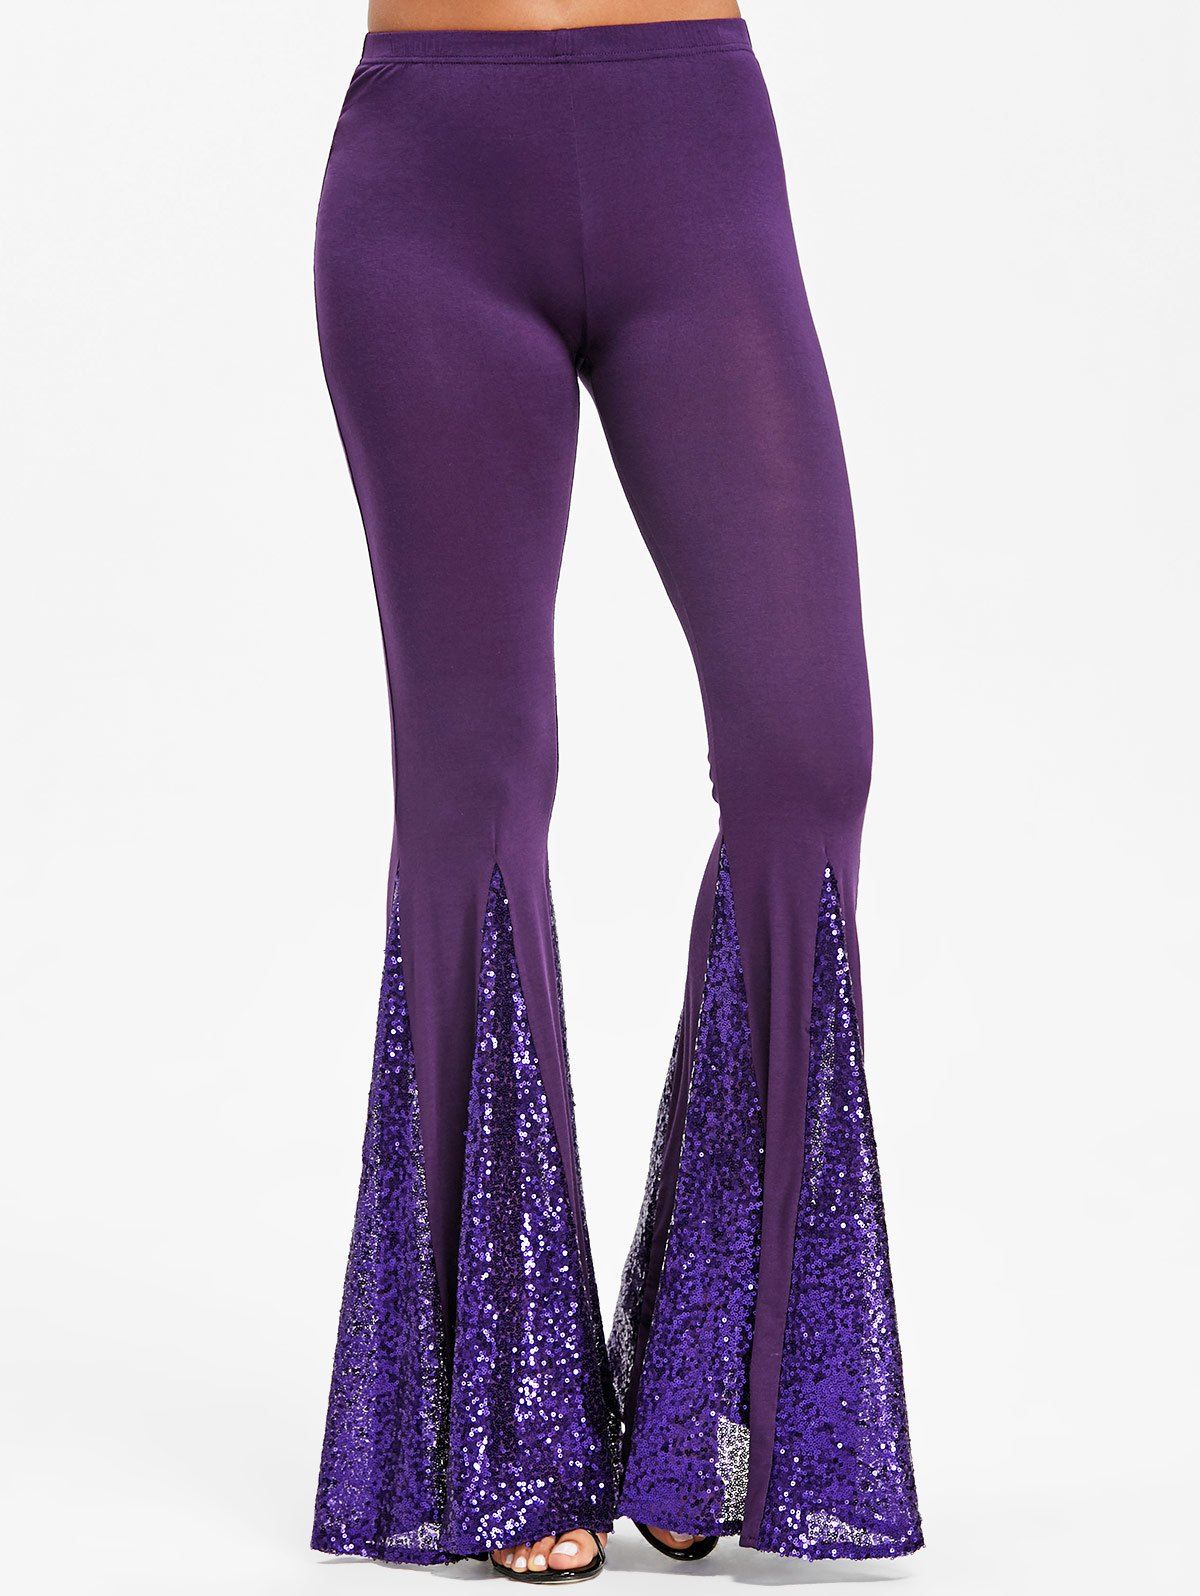 2018 Sequined Flare Pants PURPLE XL In Pants Online Store. Best Galaxy ...